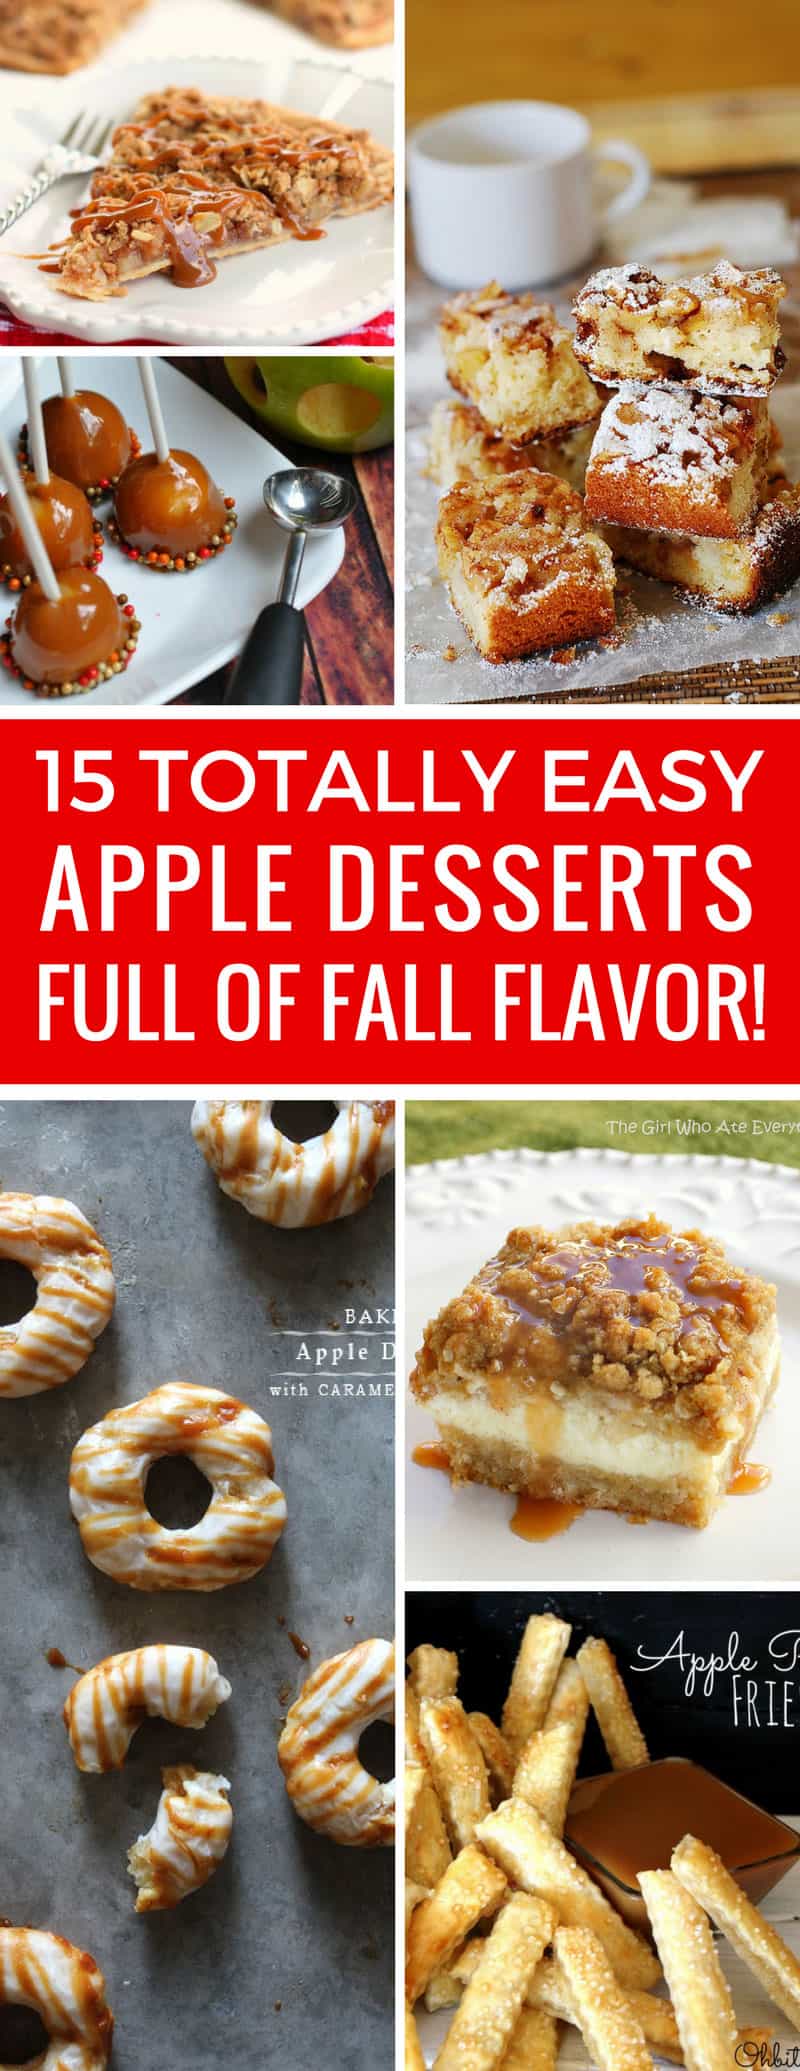 Yum! Loving these easy apple dessert recipes - and the kids do too!